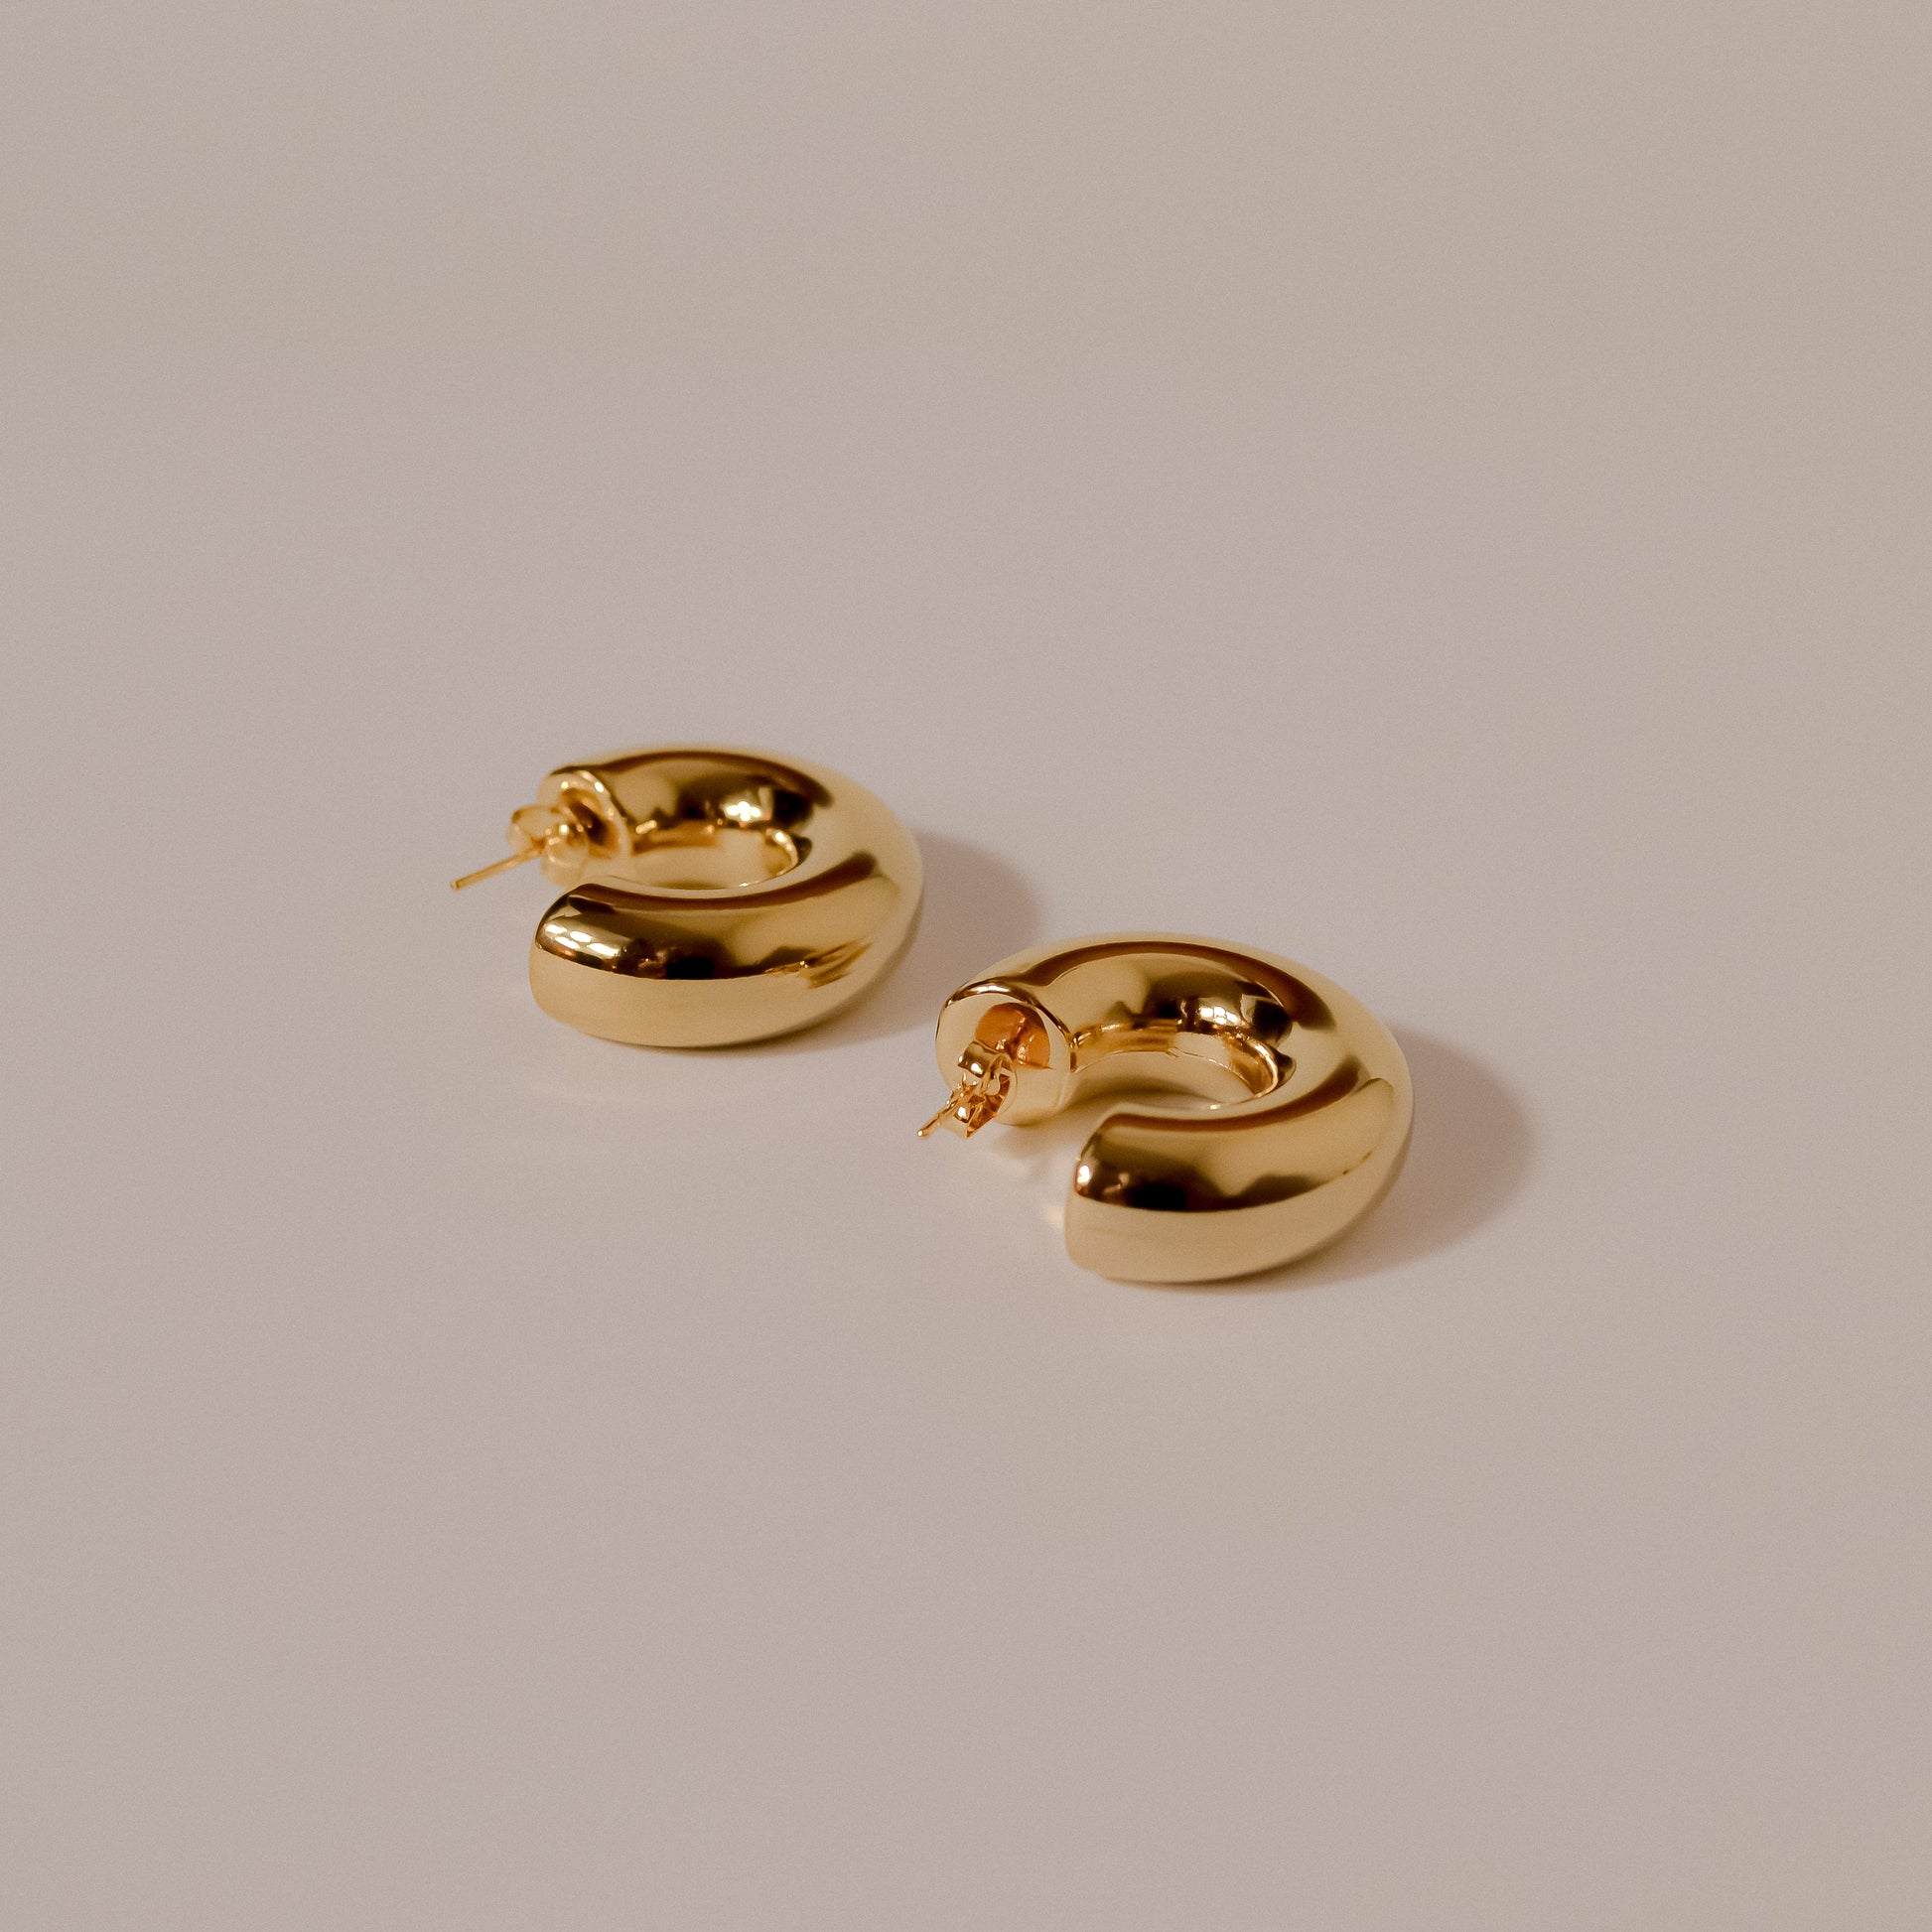 Sade chunky gold earrings, statement piece 